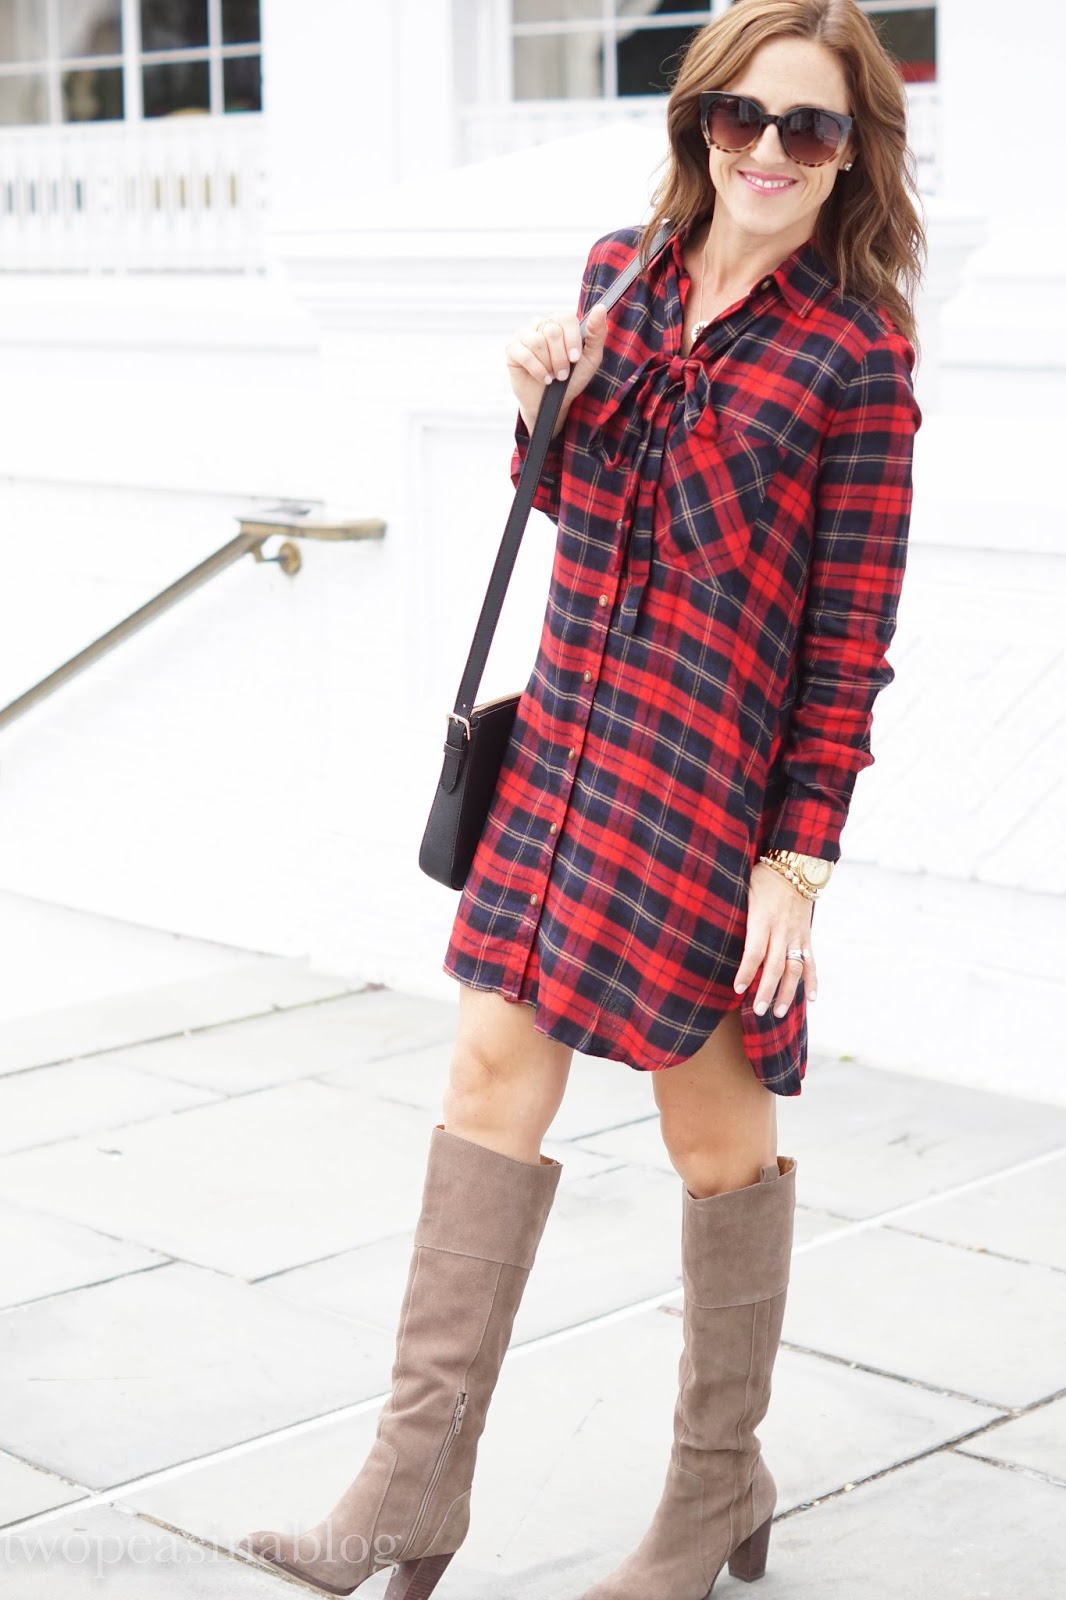 Two Peas in a Blog: Plaid Shirtdress